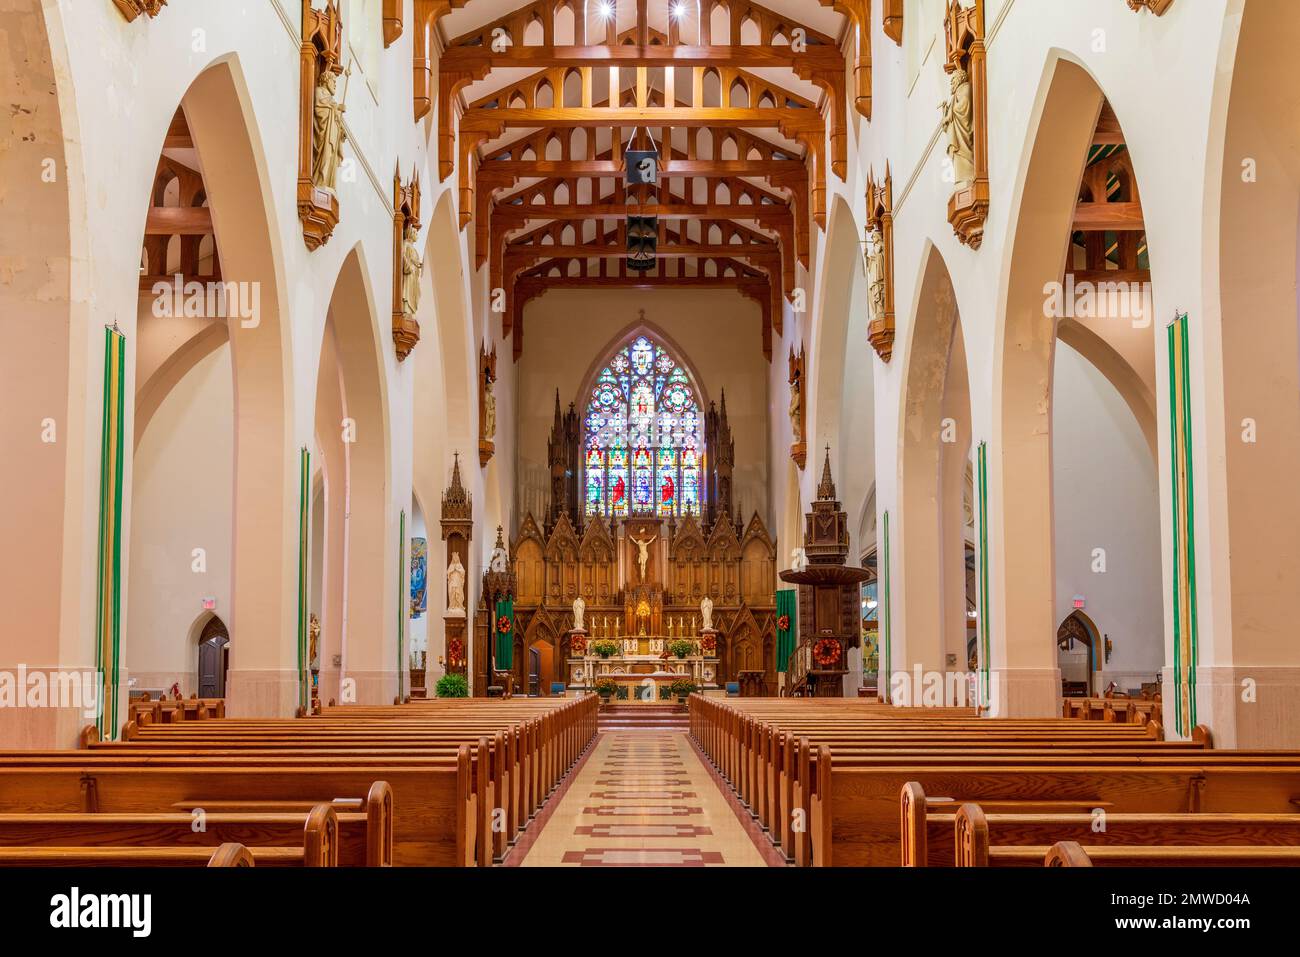 Interior of the Cathedral of the Immaculate Conception at Saint John, New Brunswick, Canada Stock Photo